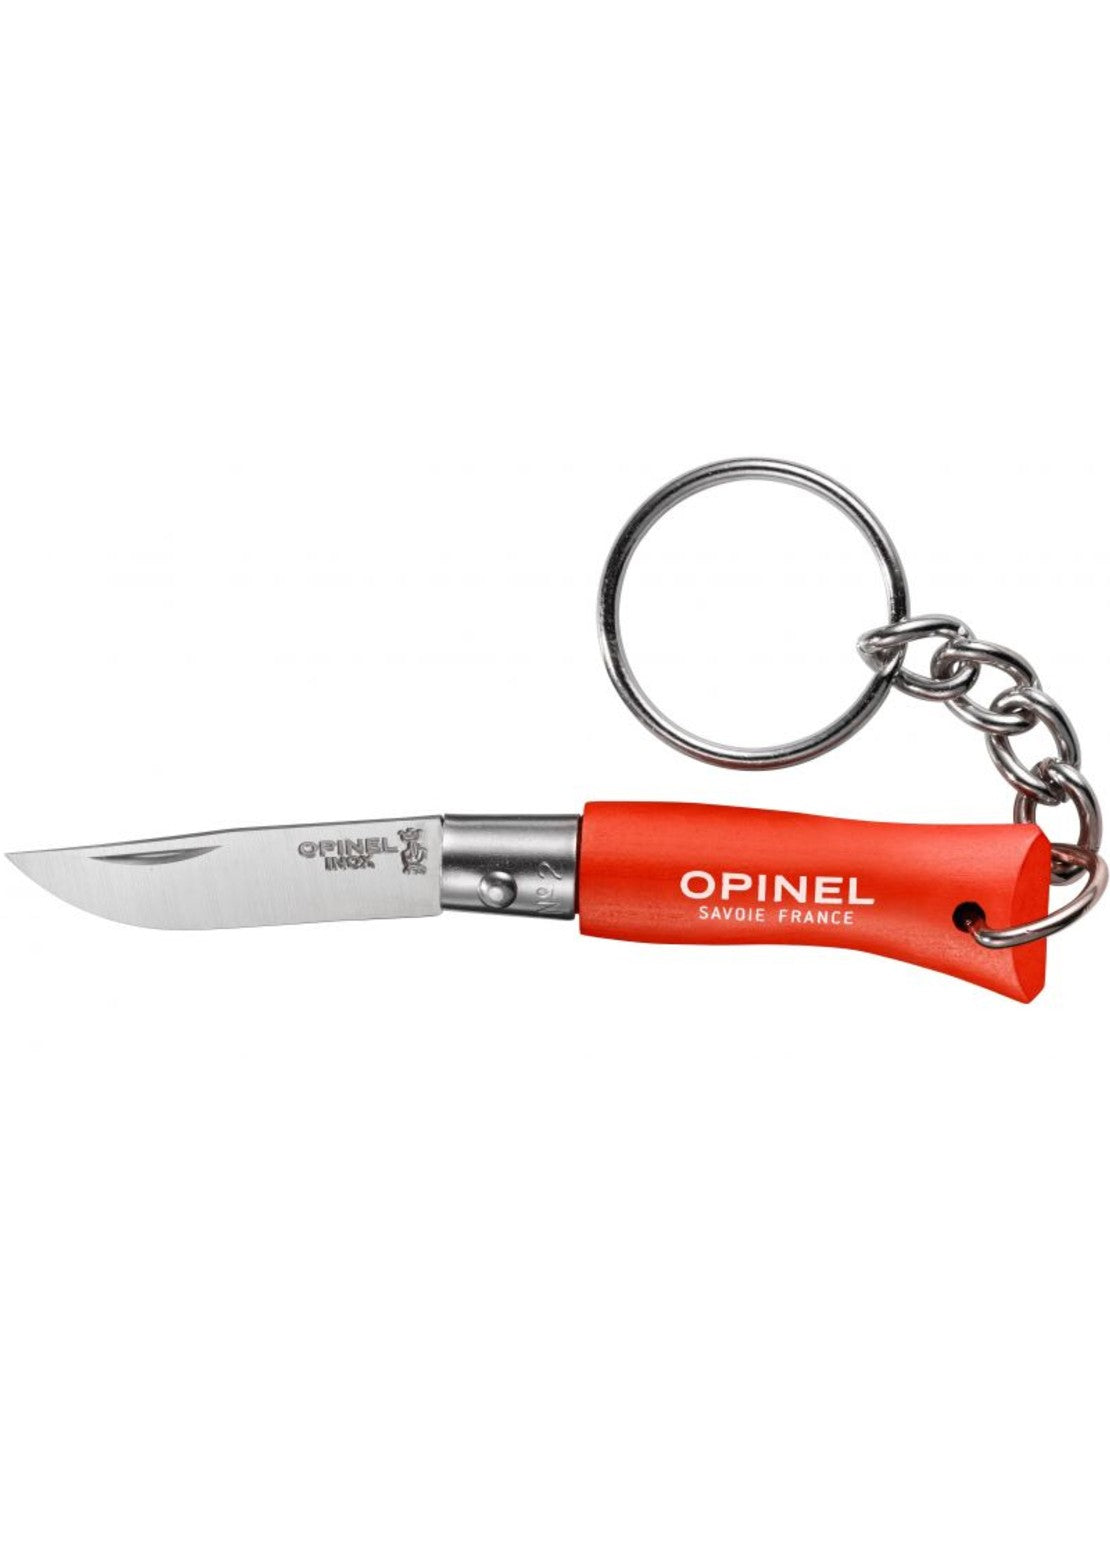 Opinel Tradition Colorama Stainless Steel N°02 Keychain Orange